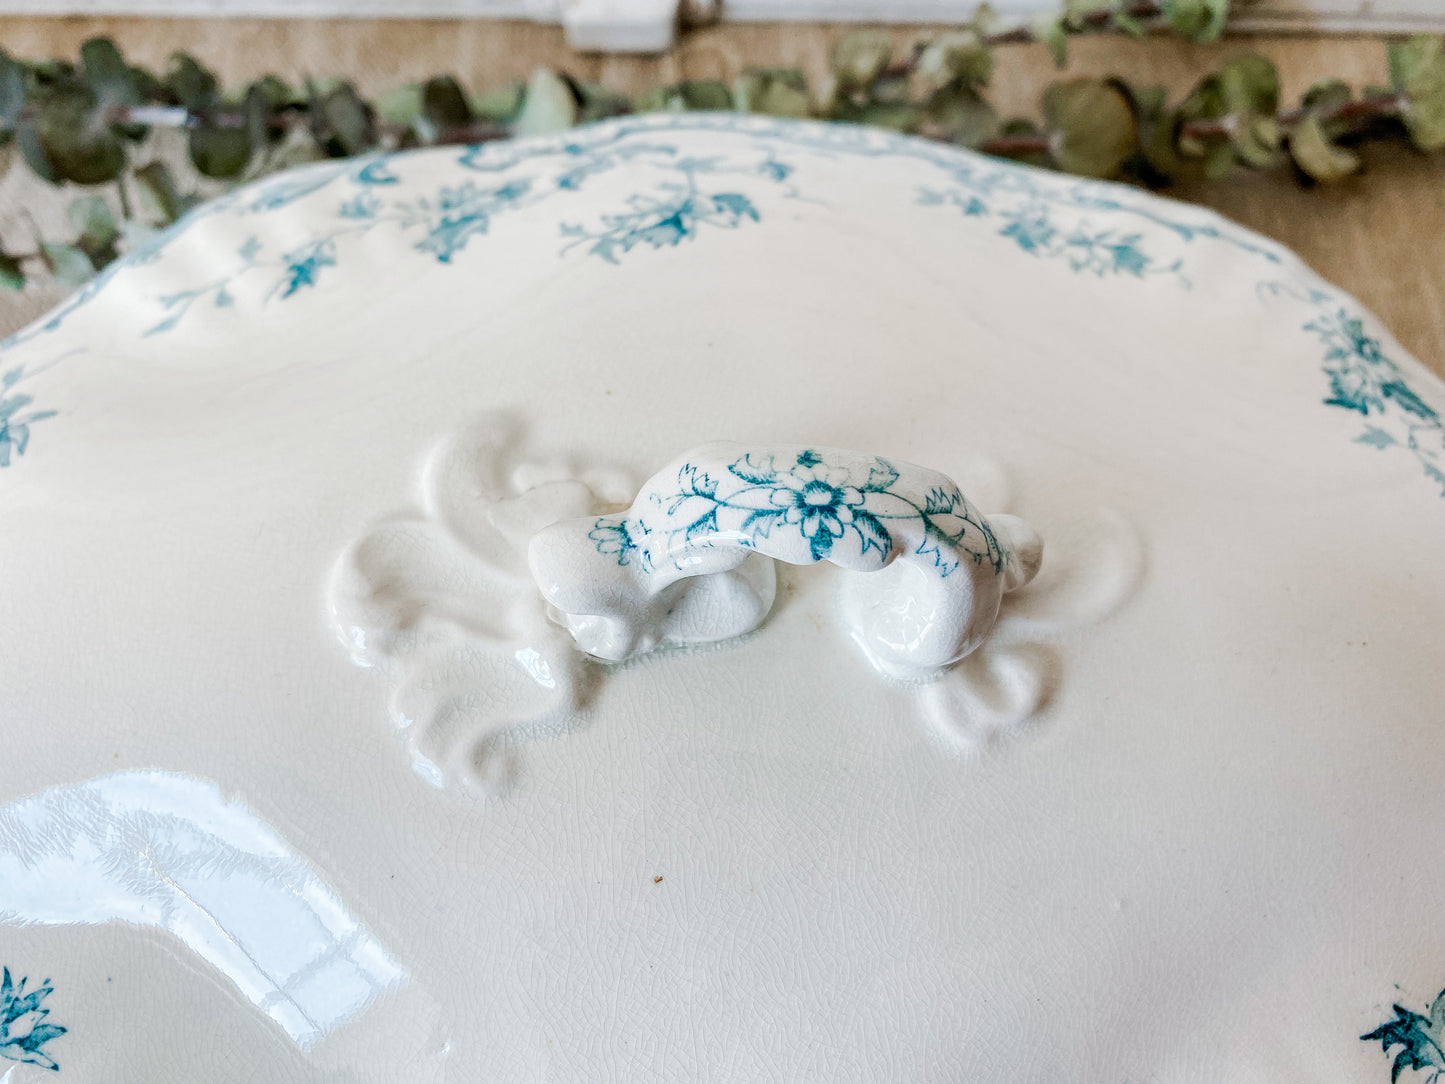 Antique Ironstone Soup Tureen with Lid, Teal Blue Transferware - Boquet by Malloy-Taylor, Rare Pattern, c1900